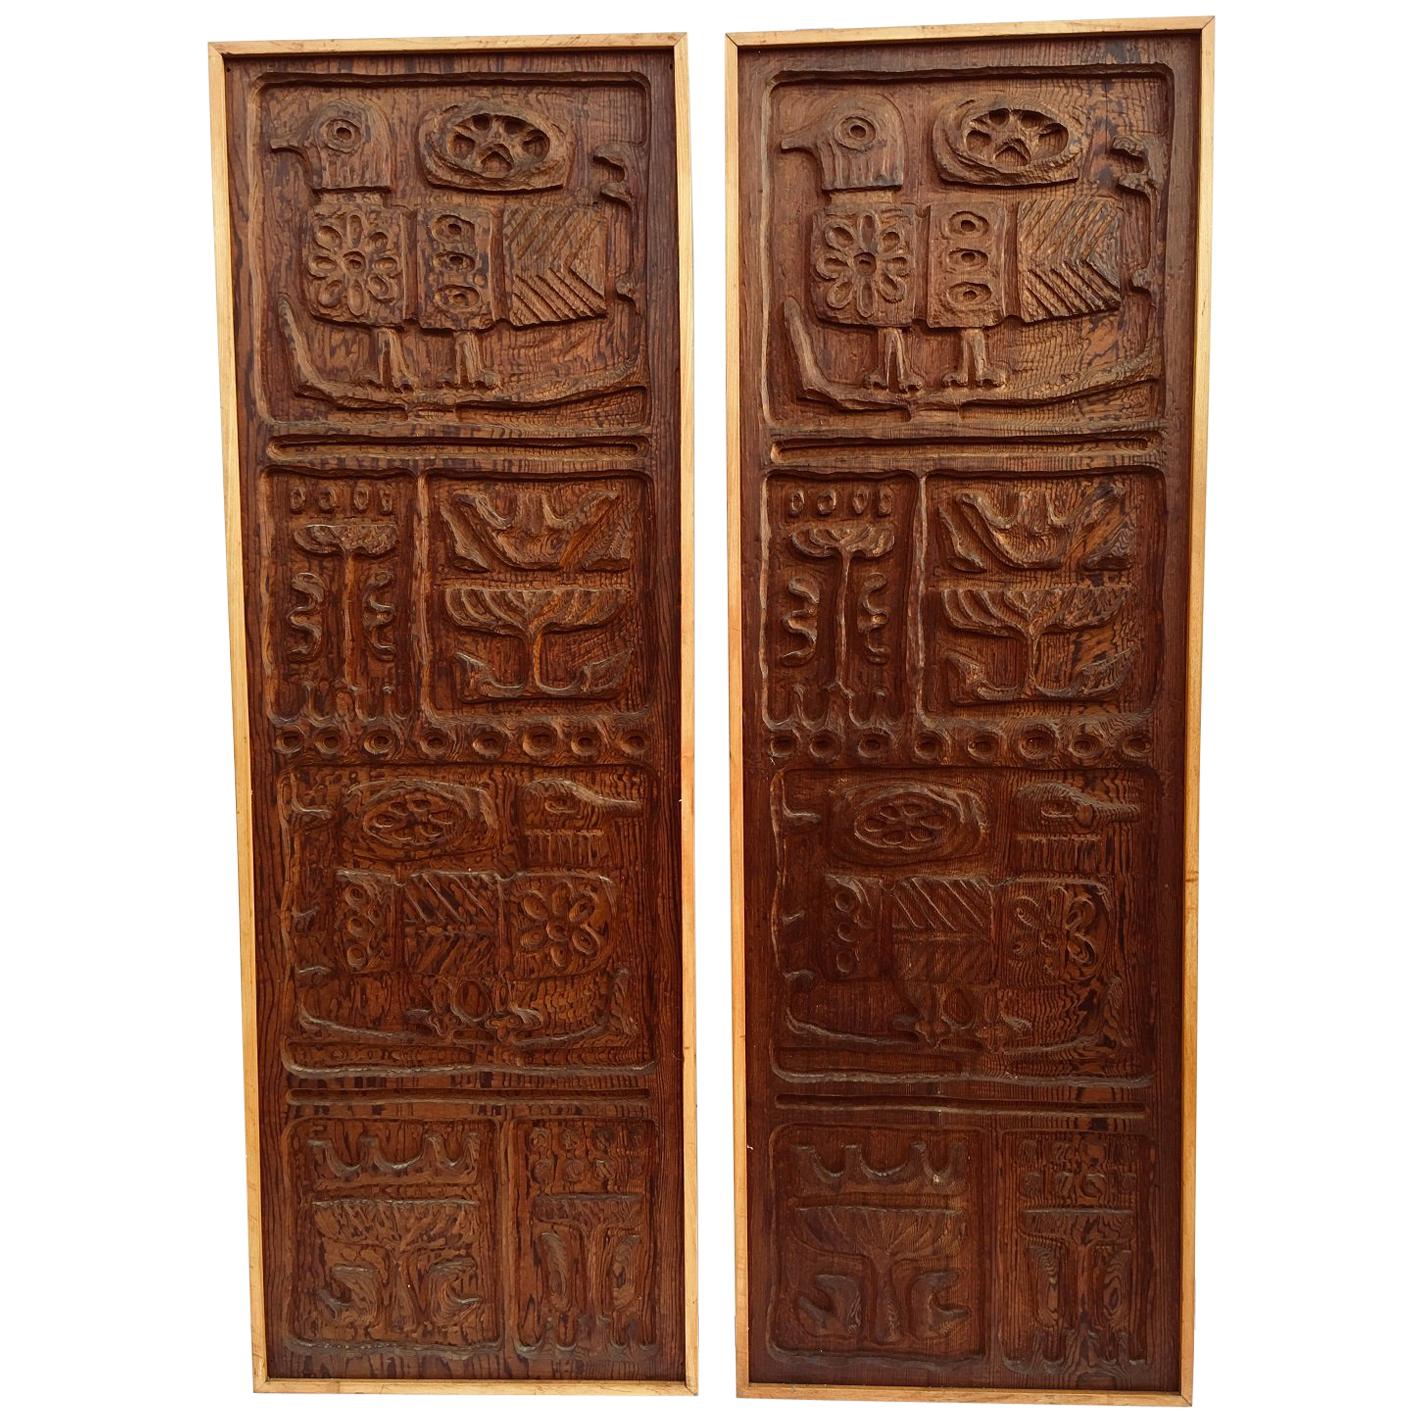 Mcm Rare Pair of Evelyn Ackerman Wood Carved Panels for Panelcarve Evie�’s Birds